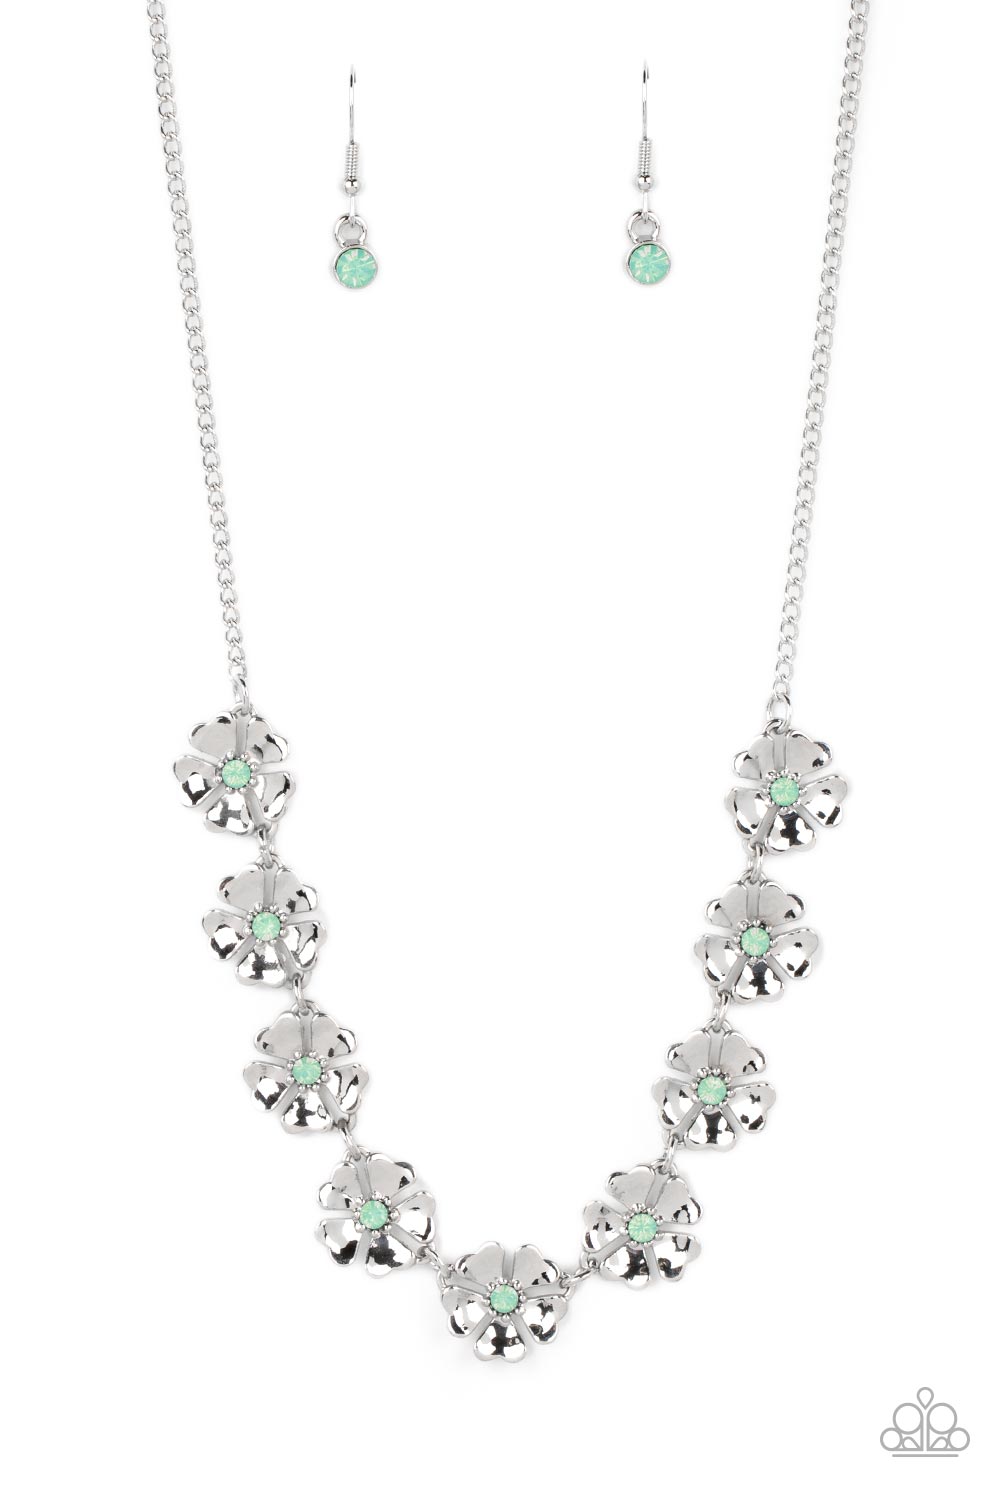 five-dollar-jewelry-petunia-palace-green-necklace-paparazzi-accessories